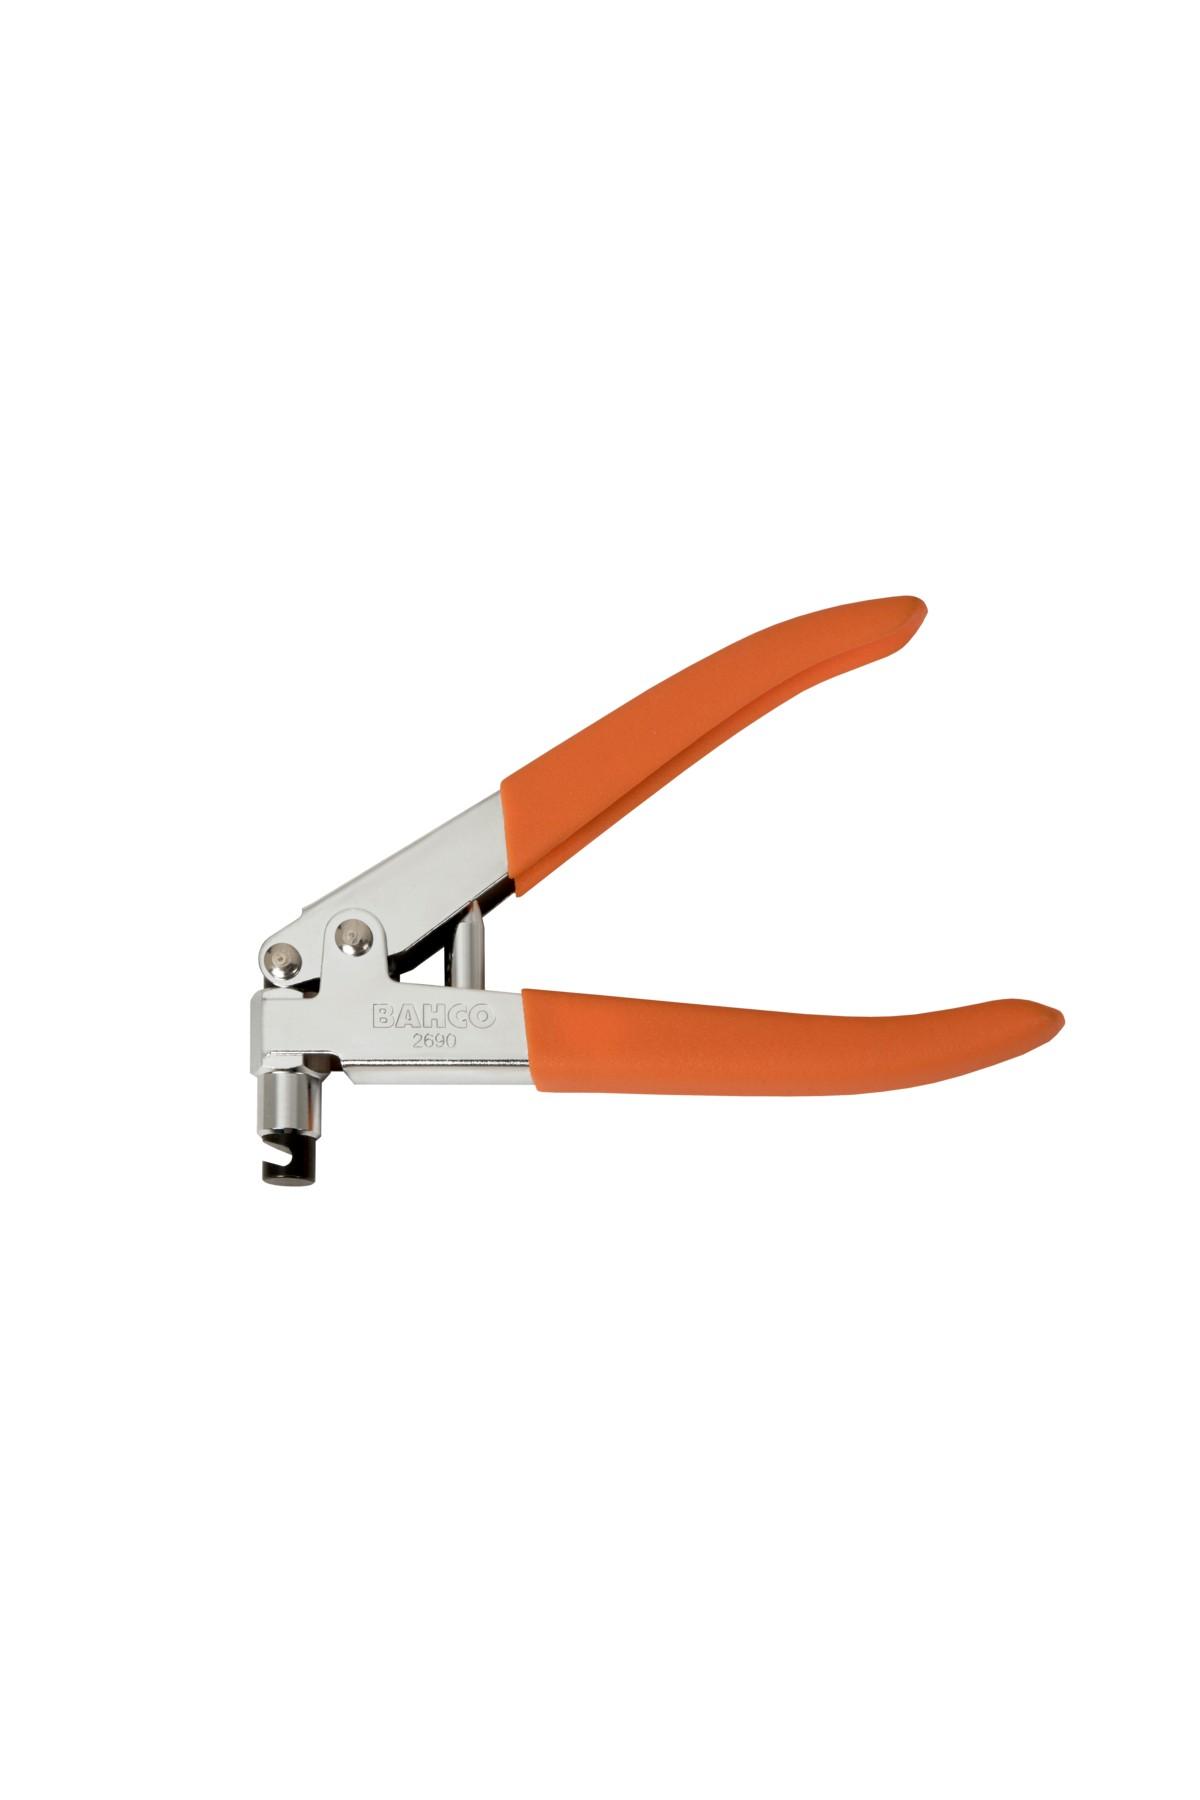 Excavation pliers for cable trays etc.